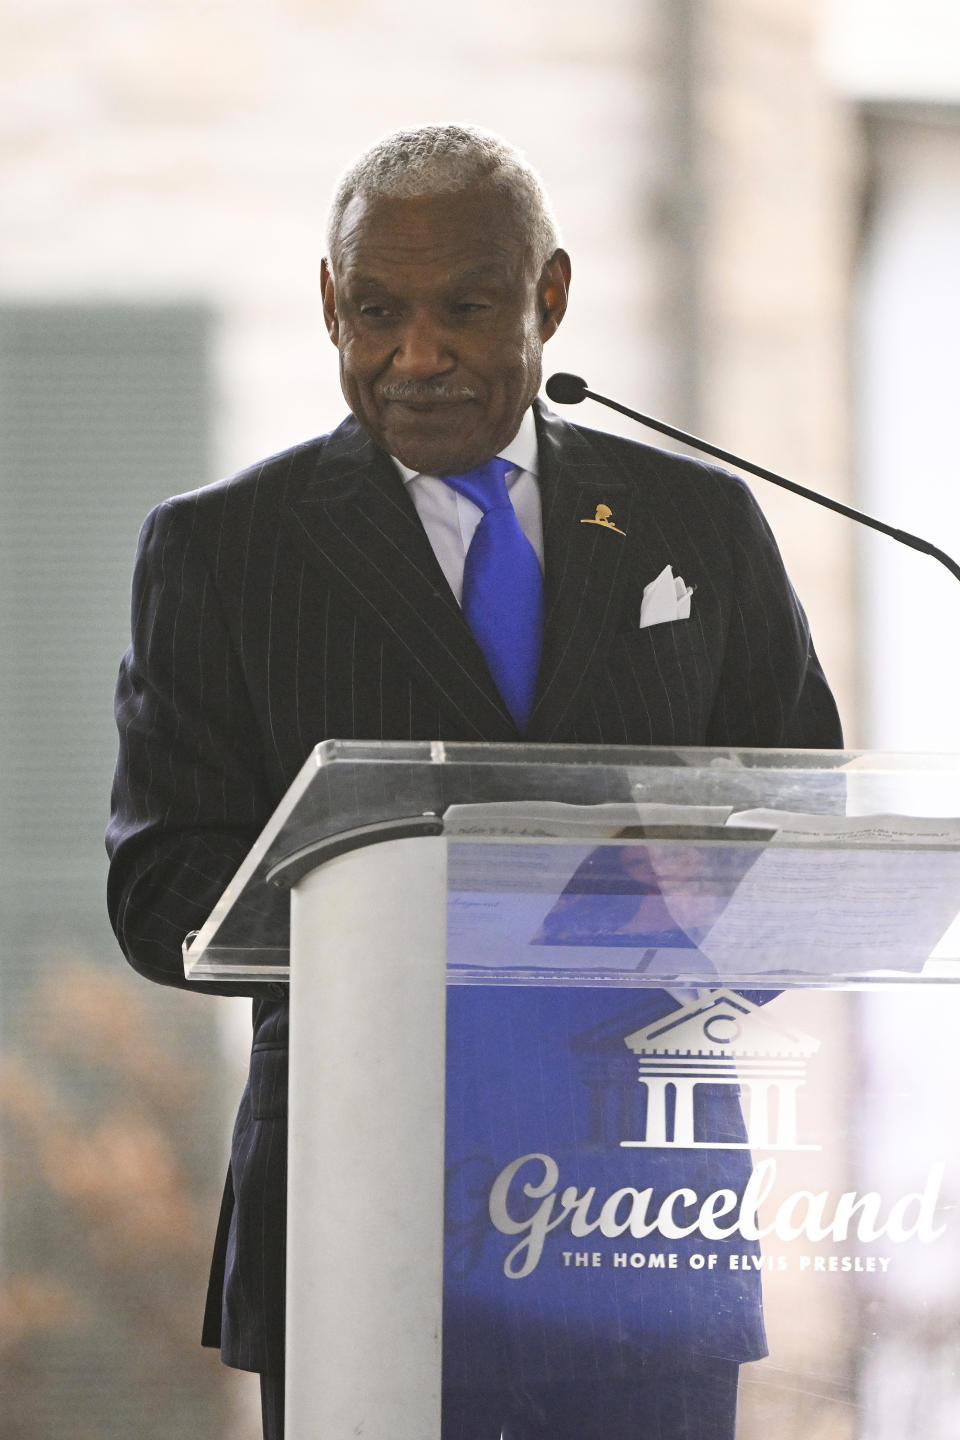 Former Memphis Mayor A C Wharton gives a tribute during a memorial service for Lisa Marie Presley at Graceland Sunday, Jan. 22, 2023, in Memphis, Tenn. She died Jan. 12 after being hospitalized for a medical emergency and was buried on the property next to her son Benjamin Keough, and near her father Elvis Presley and his two parents. (AP Photo/John Amis)